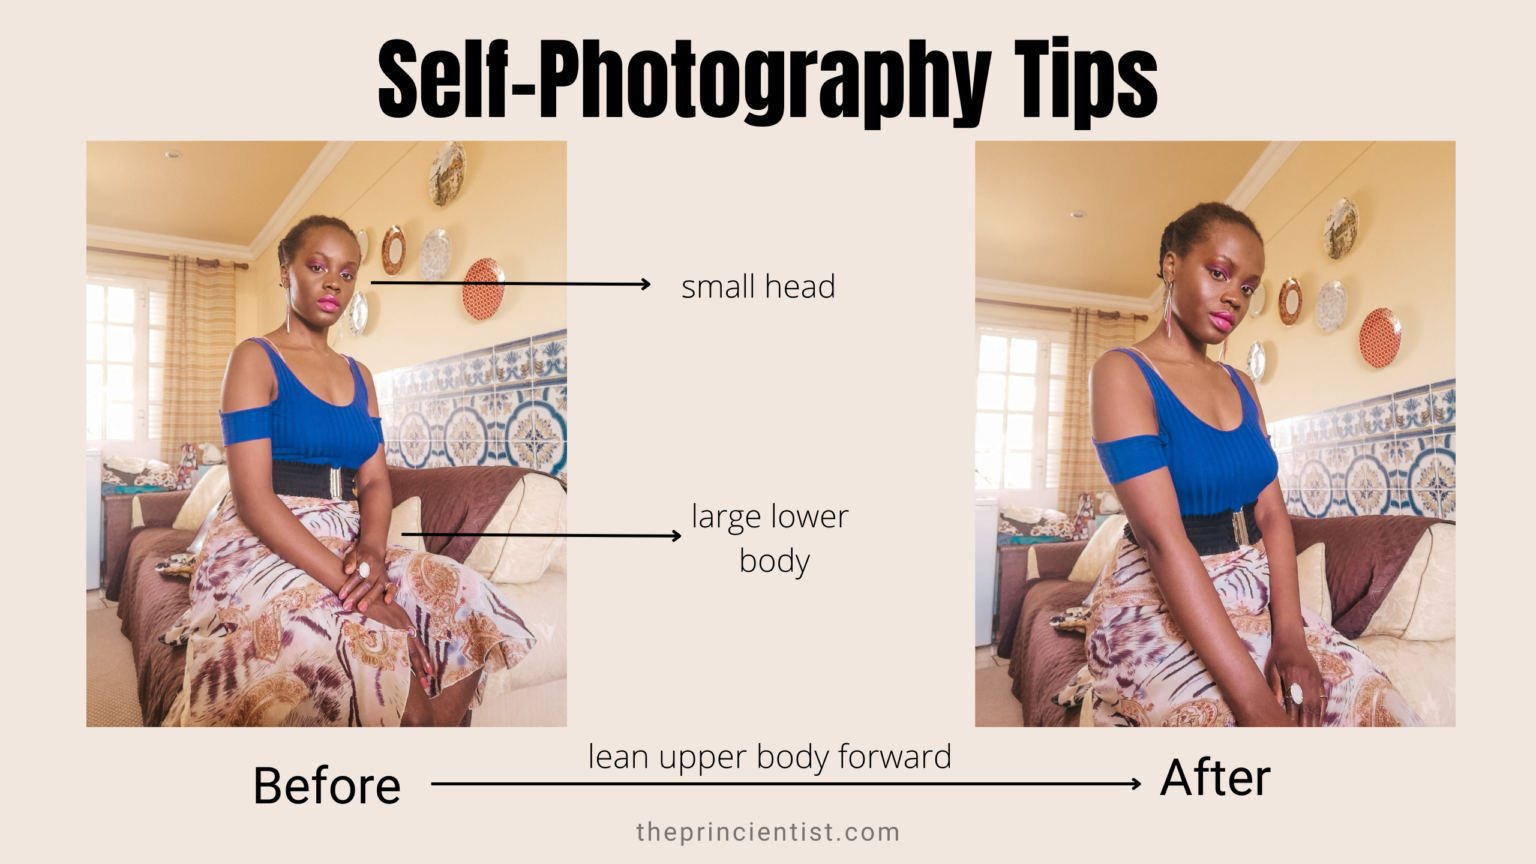 self-photography-tips-how to balance proportions by leaning the upper body forward